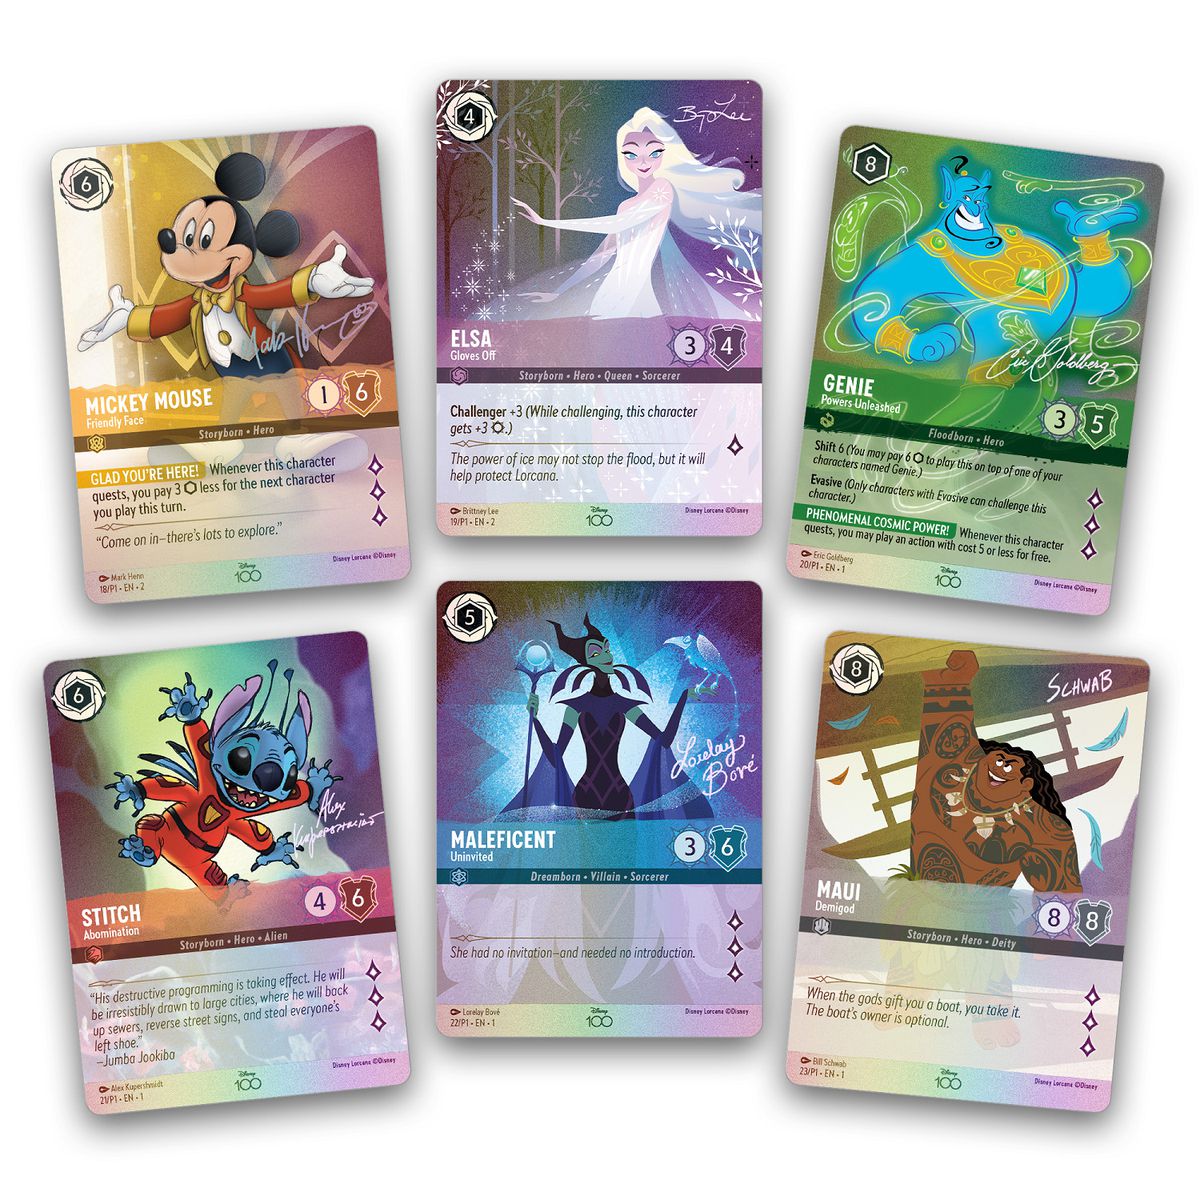 Six collectible cards in a special Disney100 treatment from Disney Lorcana: The First Chapter. They include Mickey Mouse, Elsa, Genie, Stitch, Maleficent, and Maui.